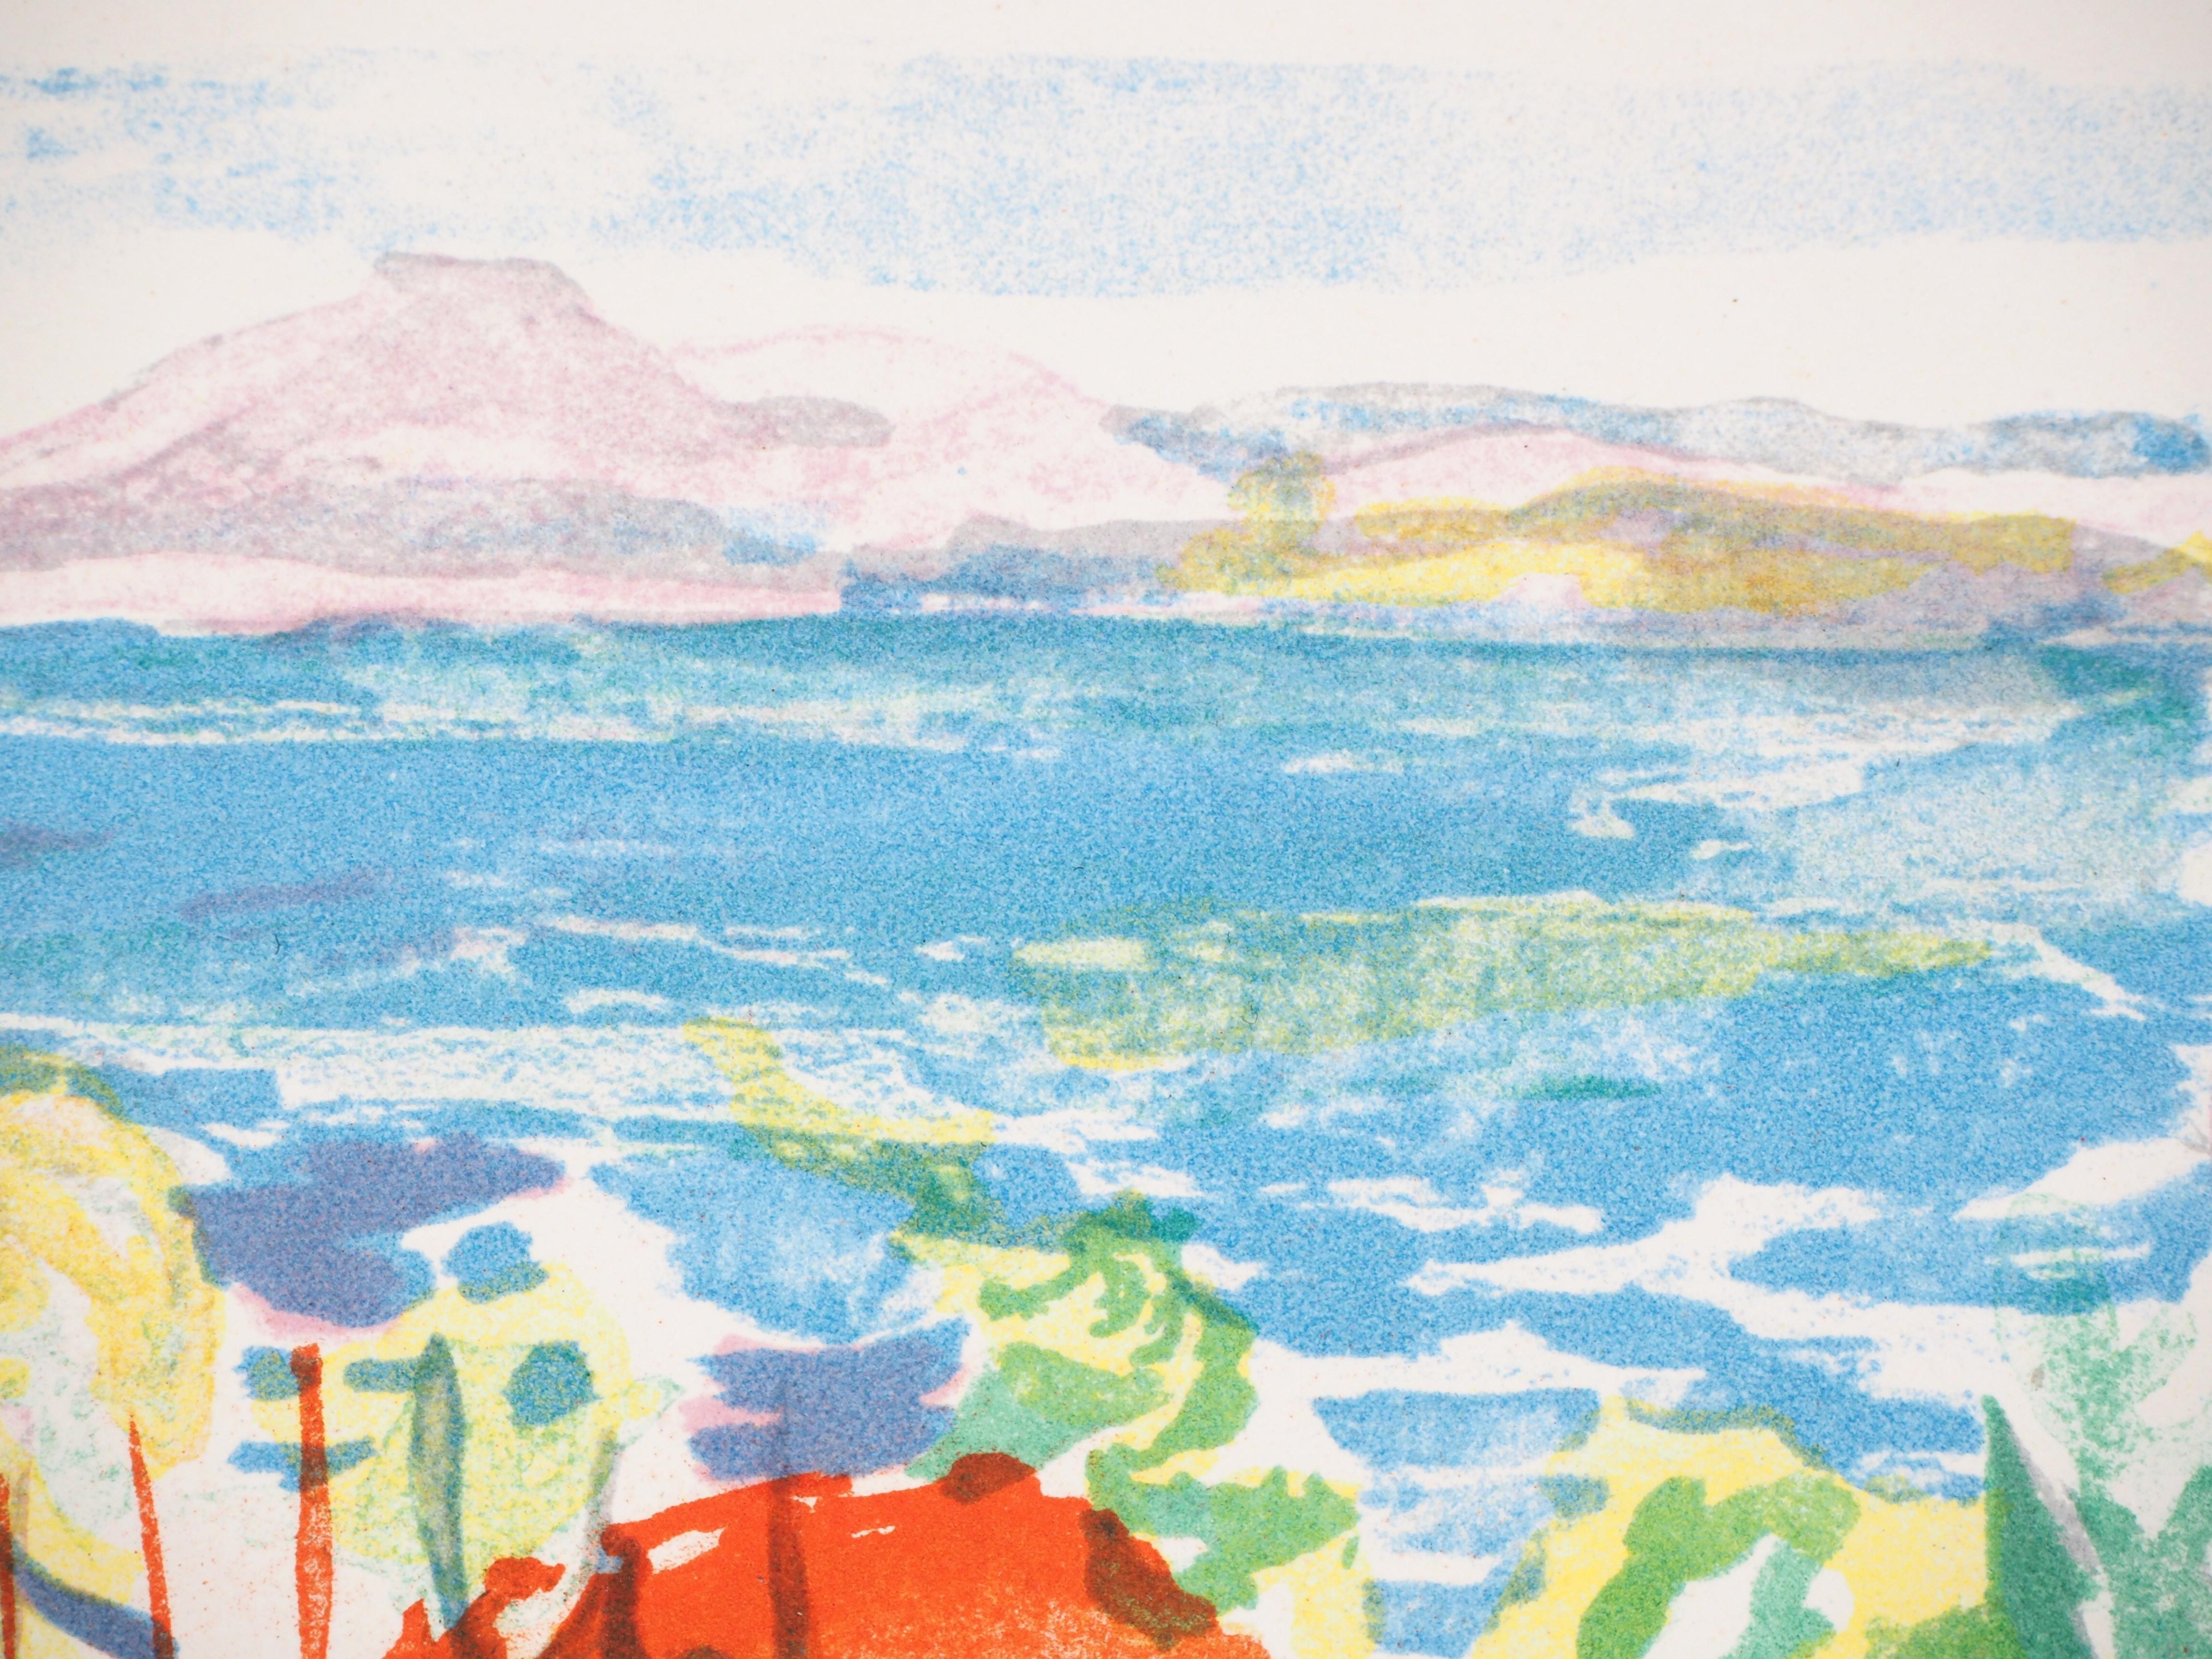 Charles CAMOIN
Sea Side

Original lithograph 
Signed in pencil bottom right
Justified Artist Proof
26 x 36 cm (c. 10.2 x 14 inch)

Excellent condition